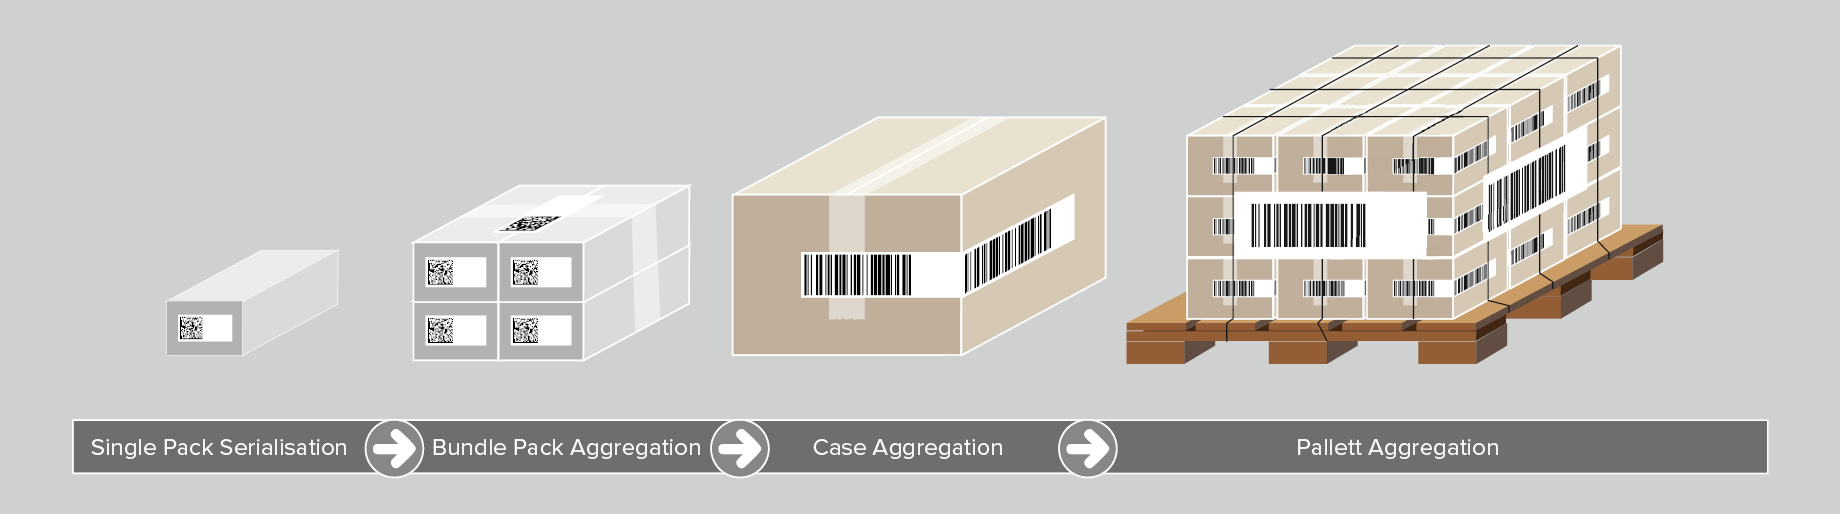 Serialisation and aggregation of medical devices at different packaging levels